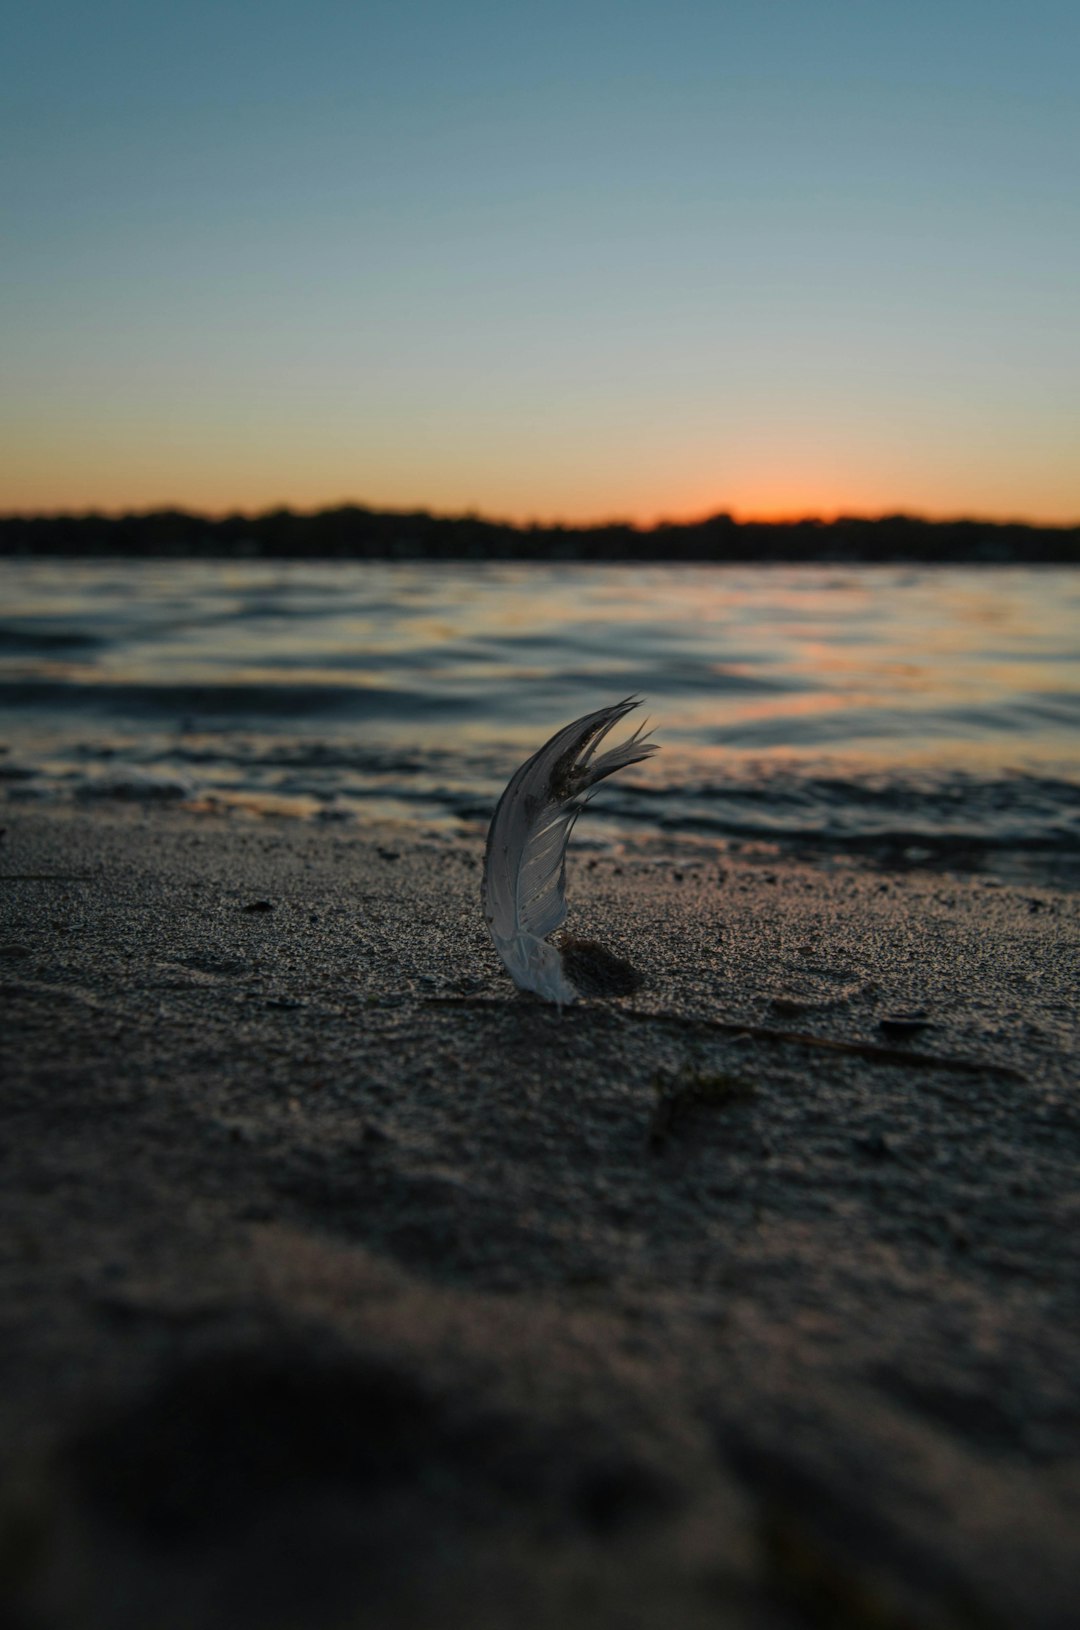 feather of a bird by the seashore